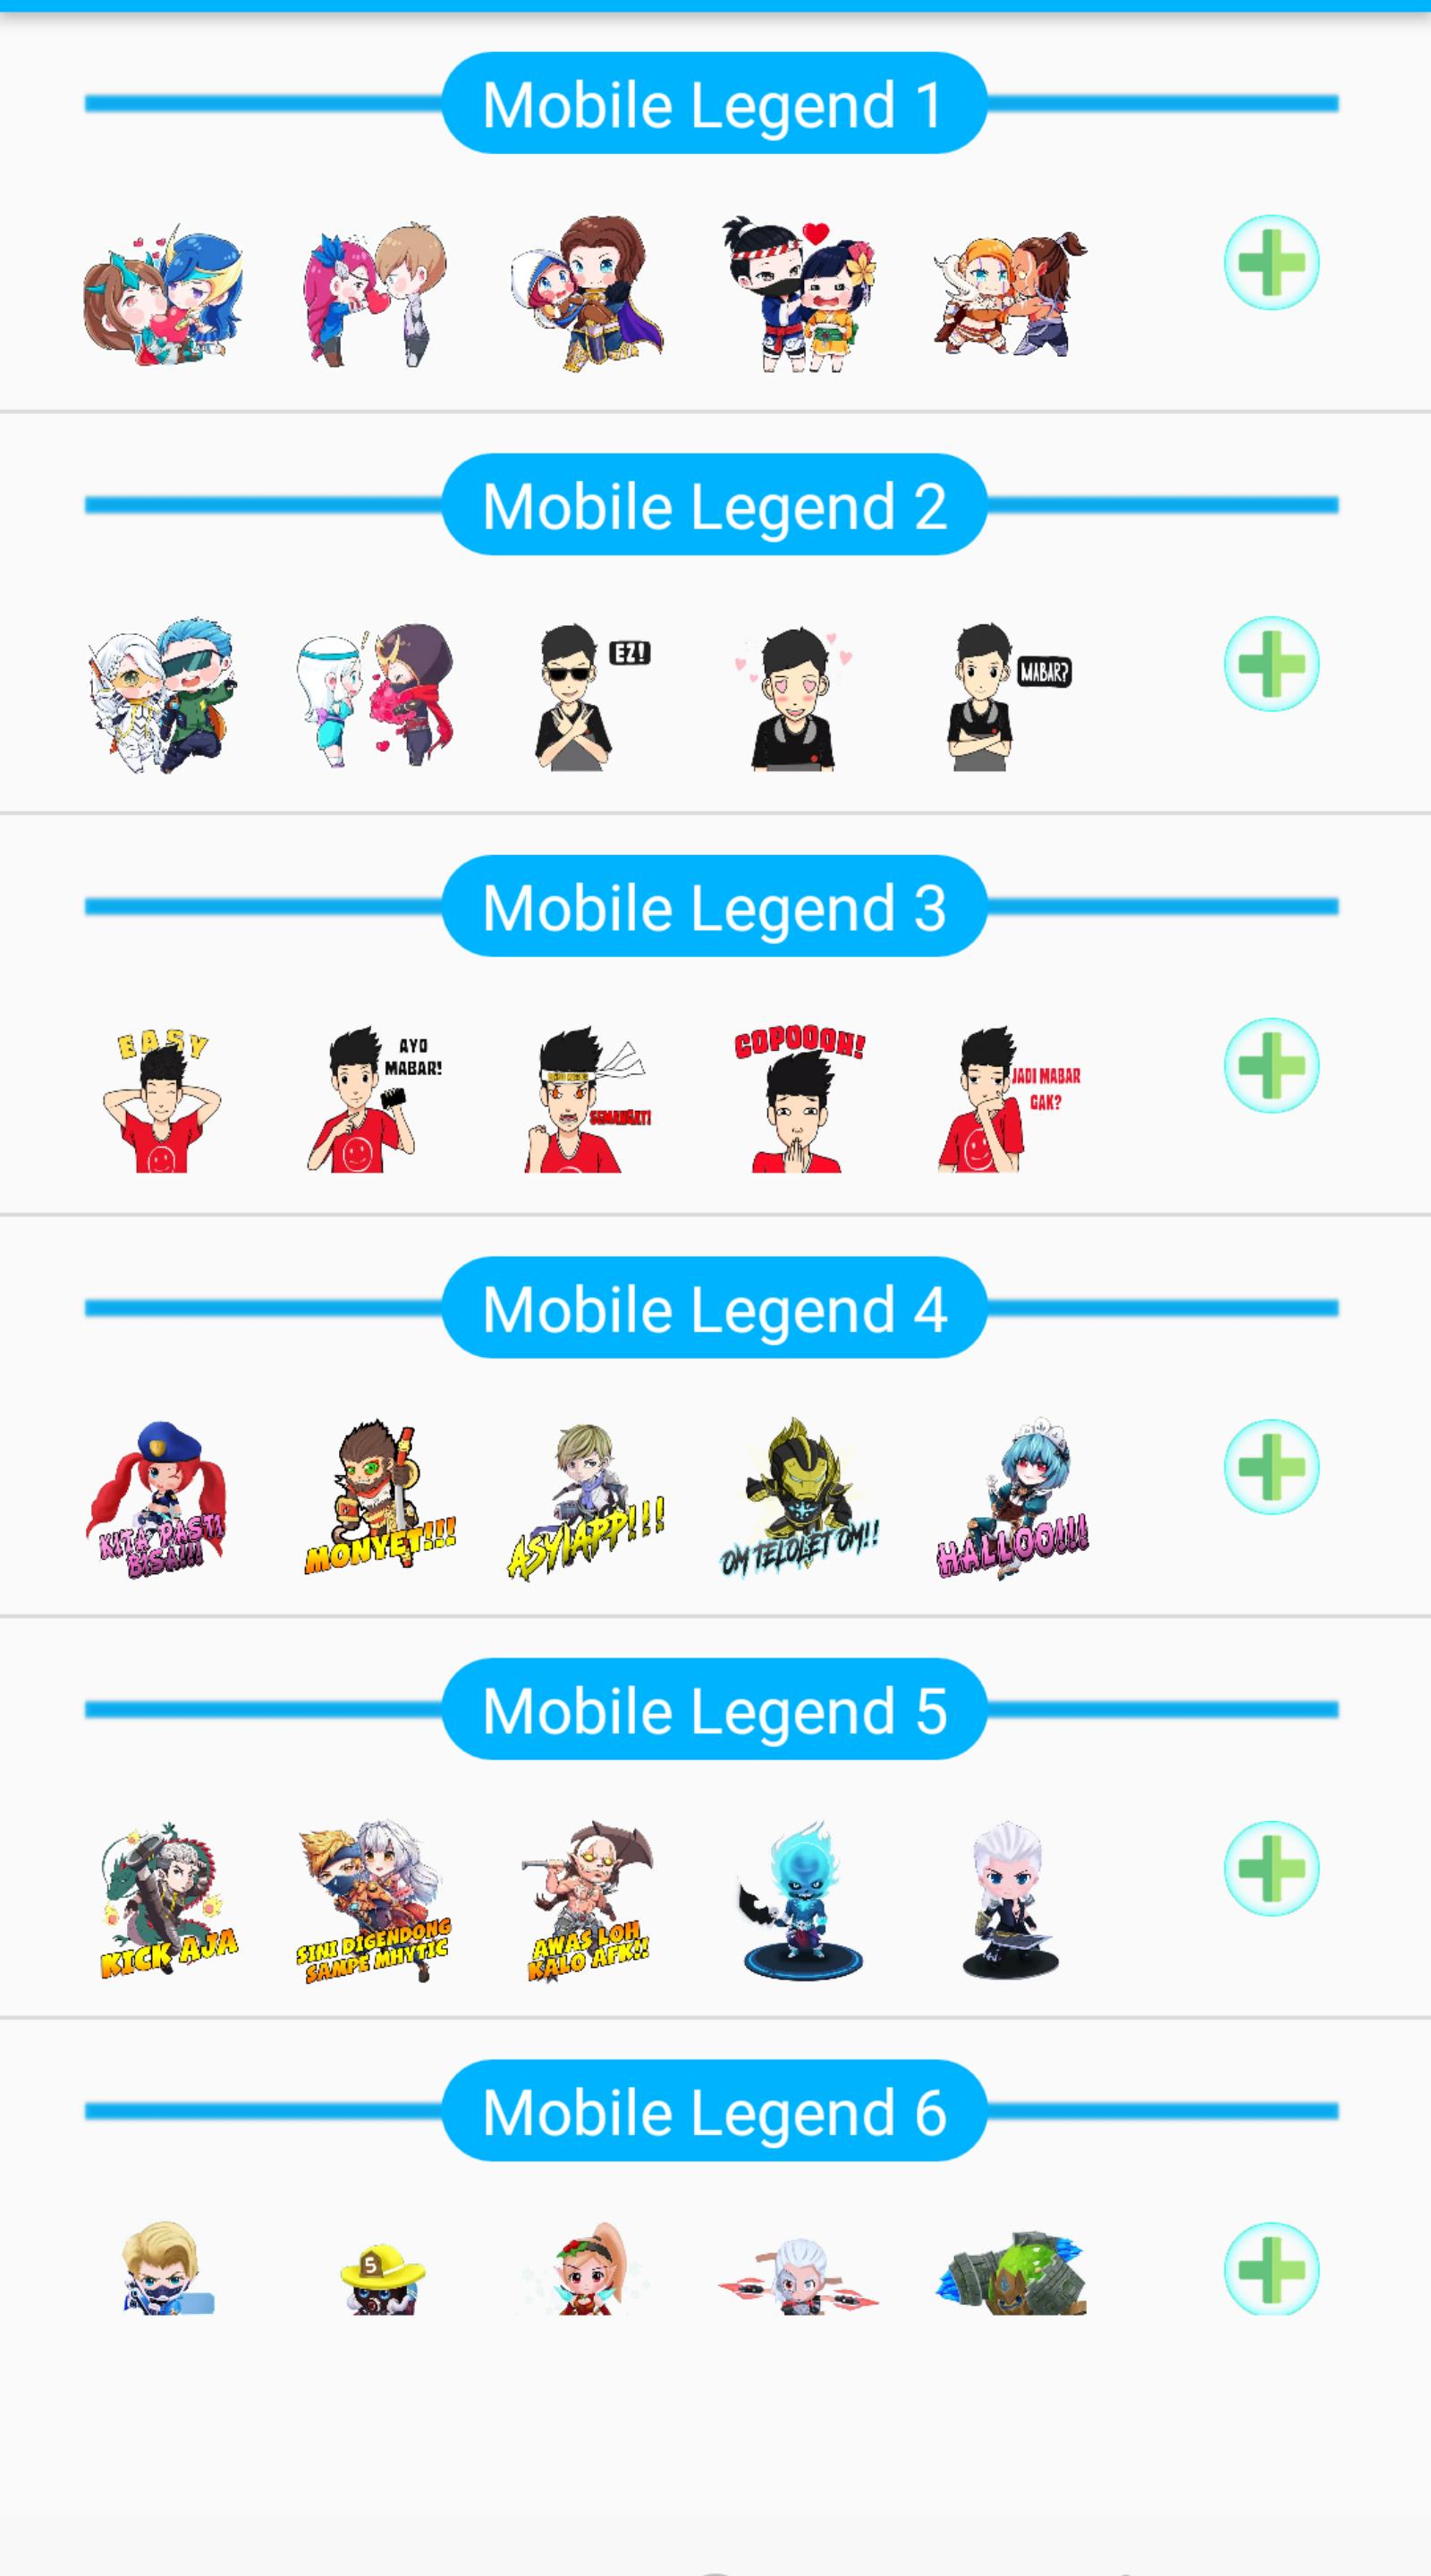 Sticker Wa Mlbb Lucu For Android Apk Download